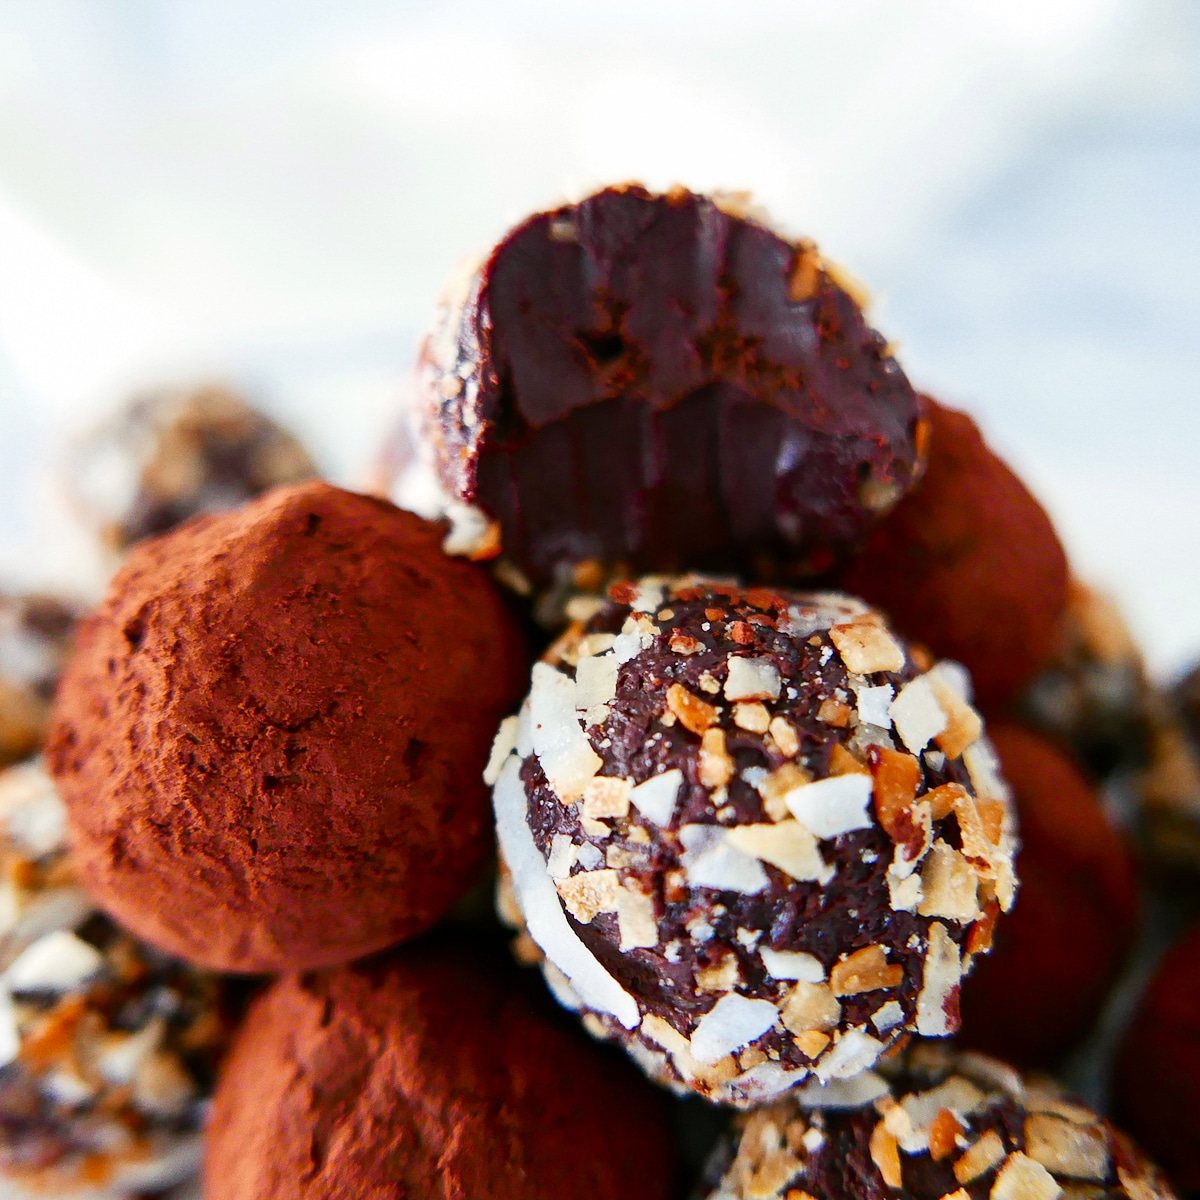 A pile of gluten free truffles with the top one missing a bite.